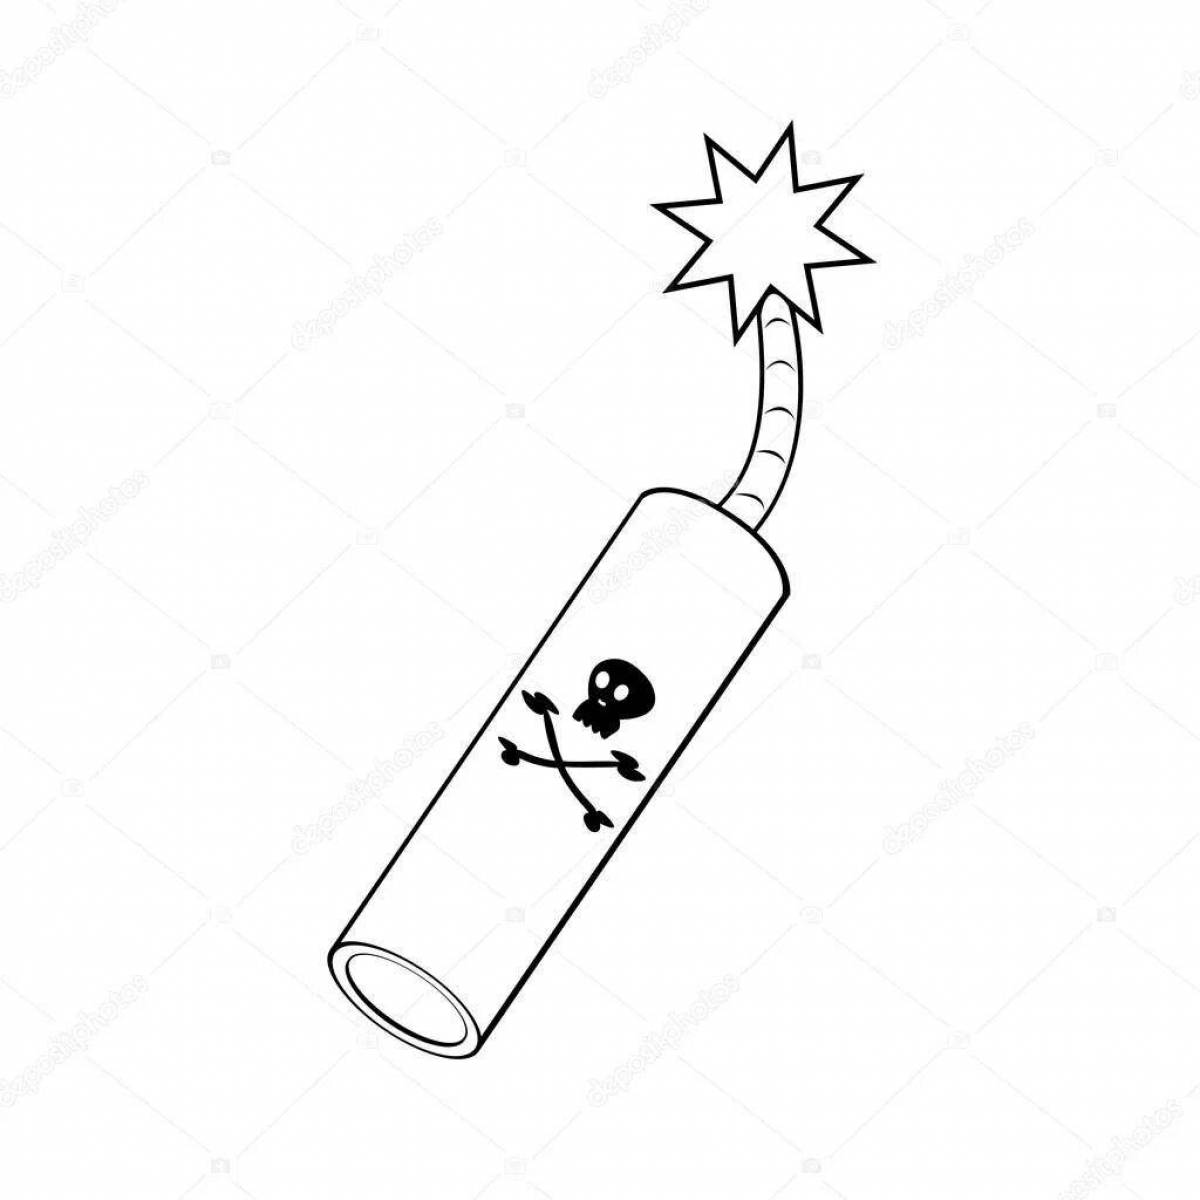 Amazing bomb coloring page for kids